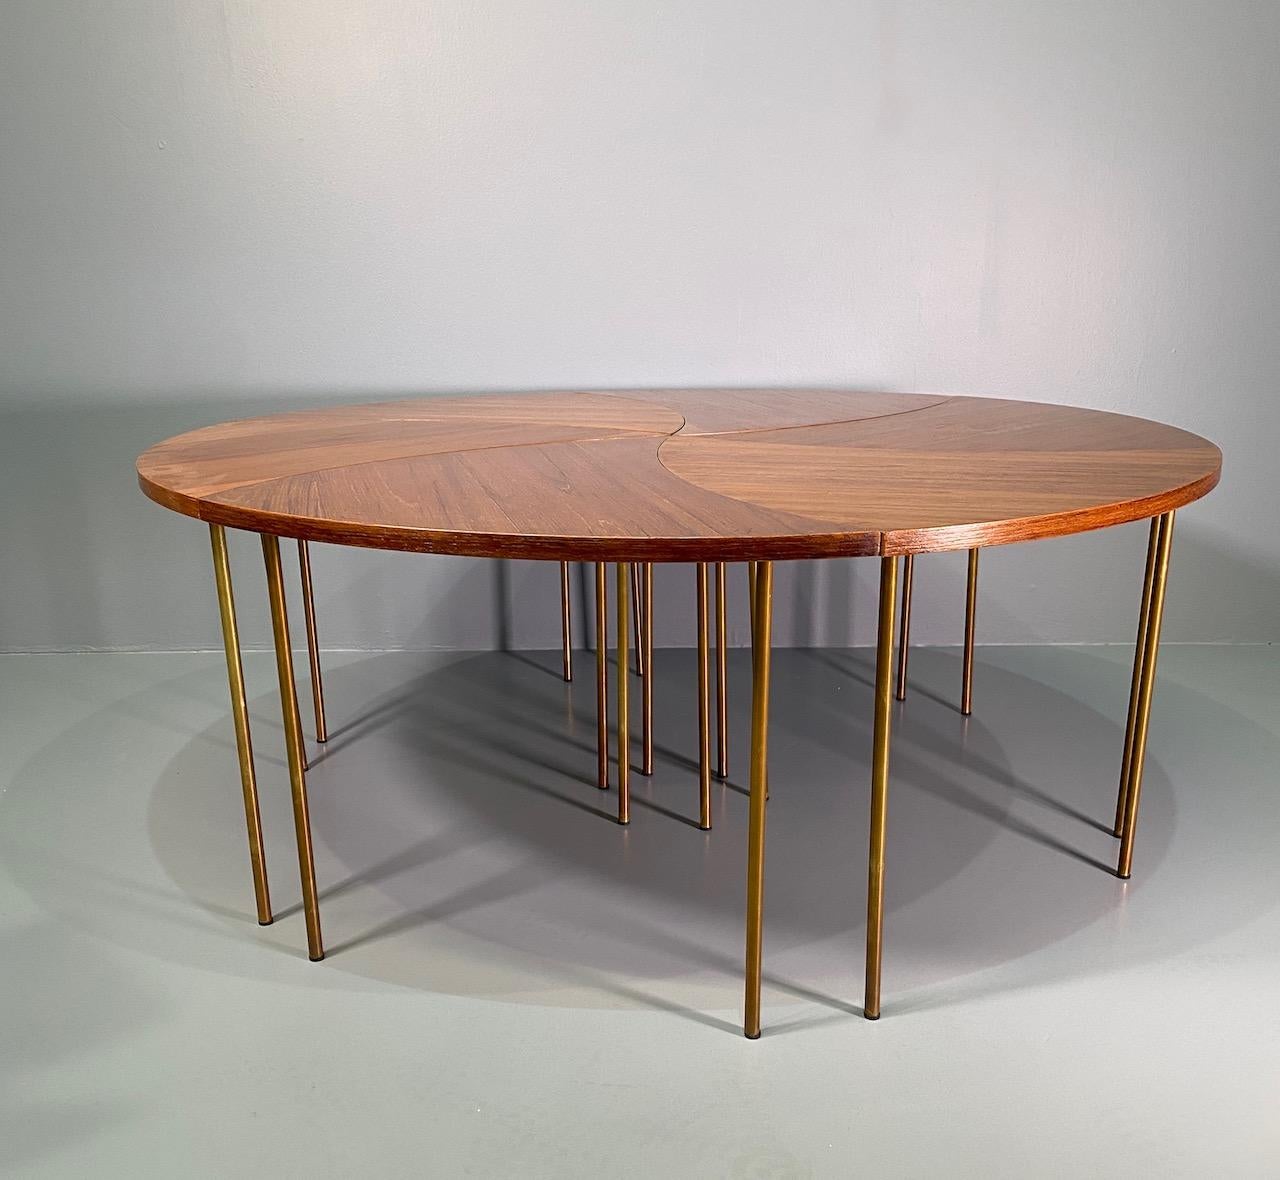 Solid teak segmented coffee table with brass legs by Peter Hvidt and Orla Mølgaard-Nielsen tables can be configured in several ways.